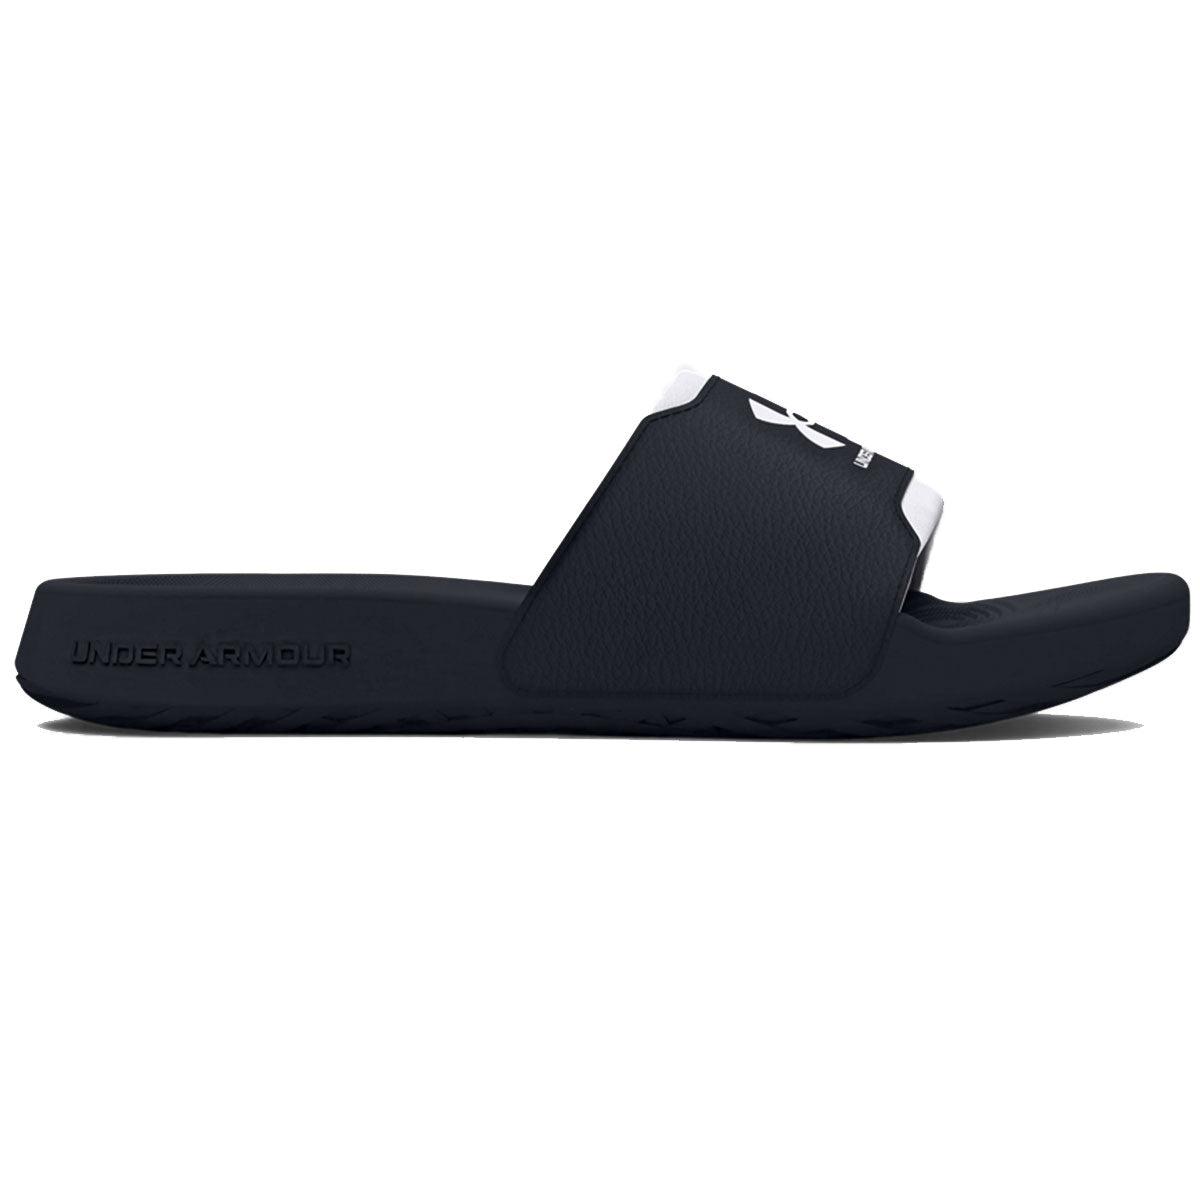 Under Armour Ignite Select Sliders - Womens - Black/White